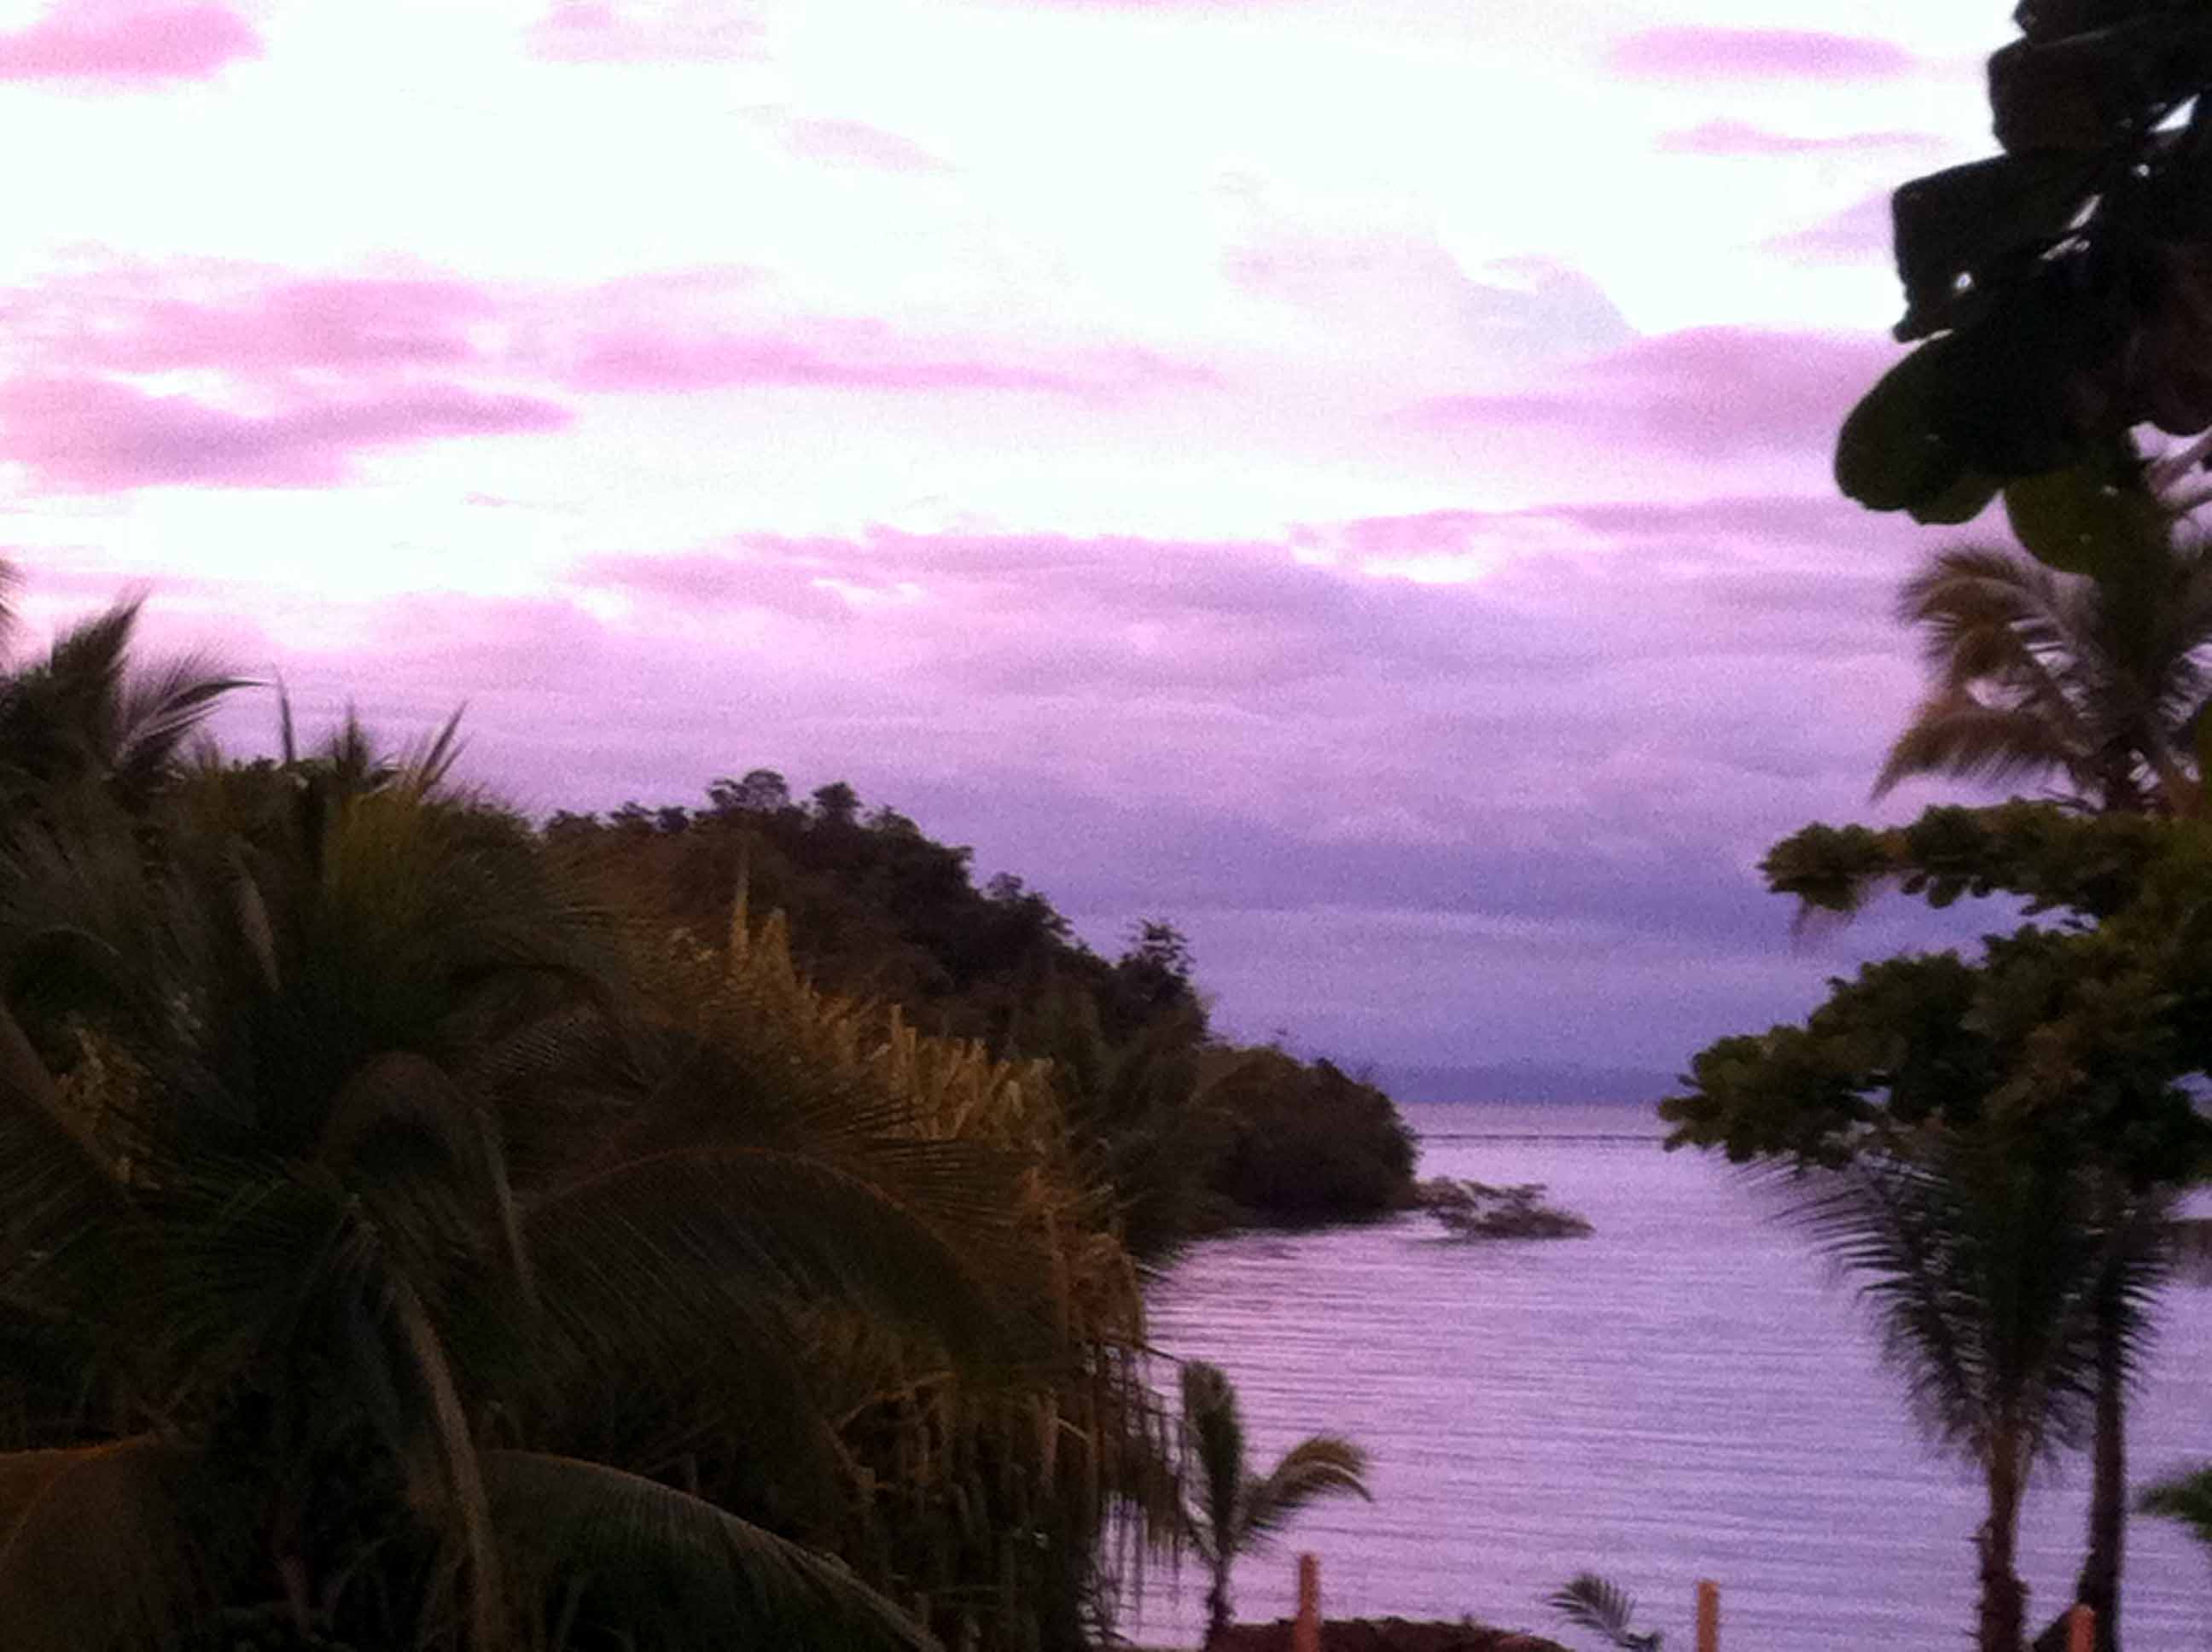 Living in Costa Rica on the Osa Peninsula